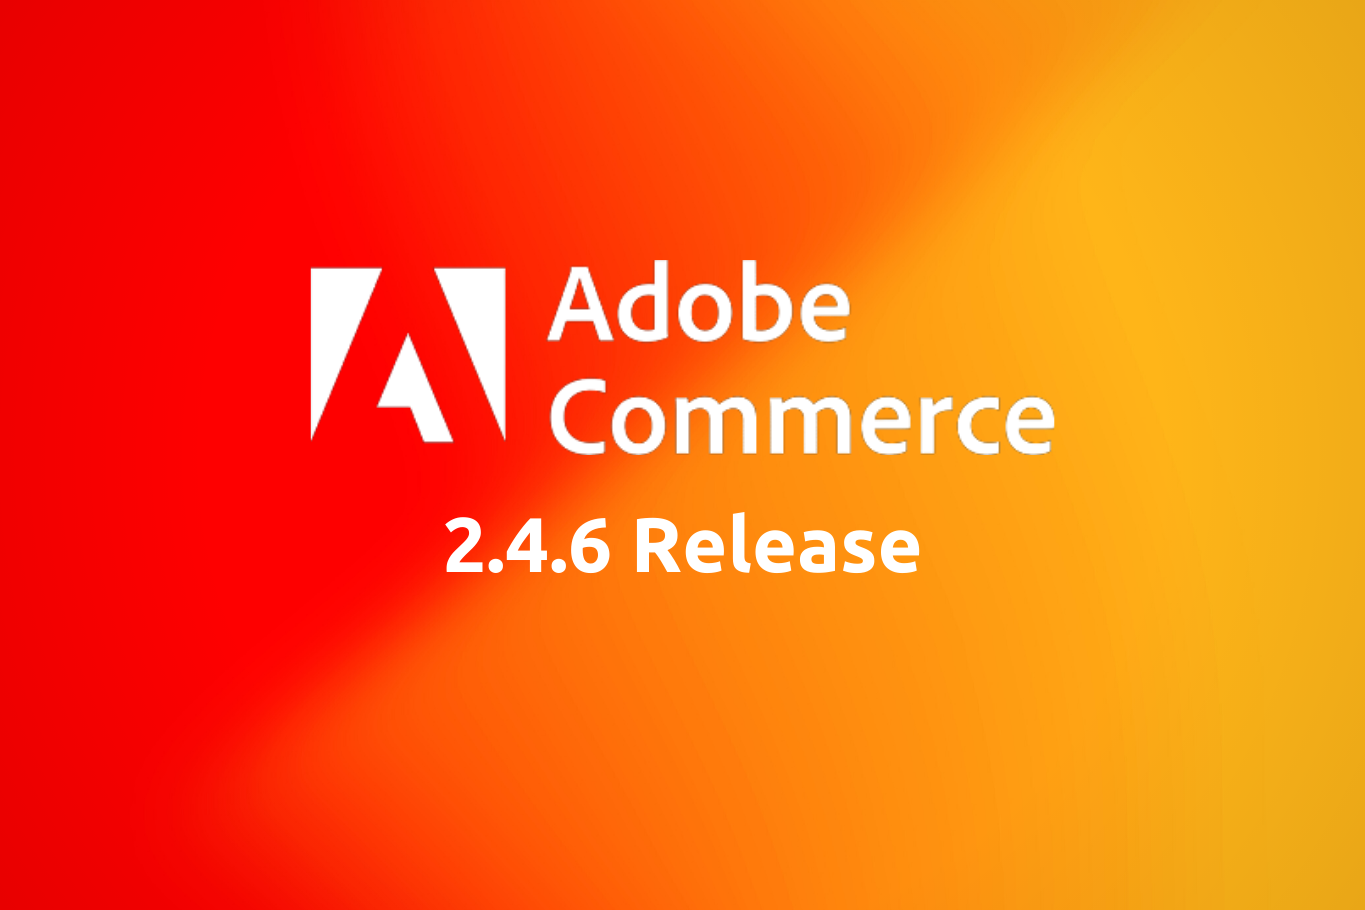 Adobe Commerce 2.4.6 Release Notes – Key Highlights and Features